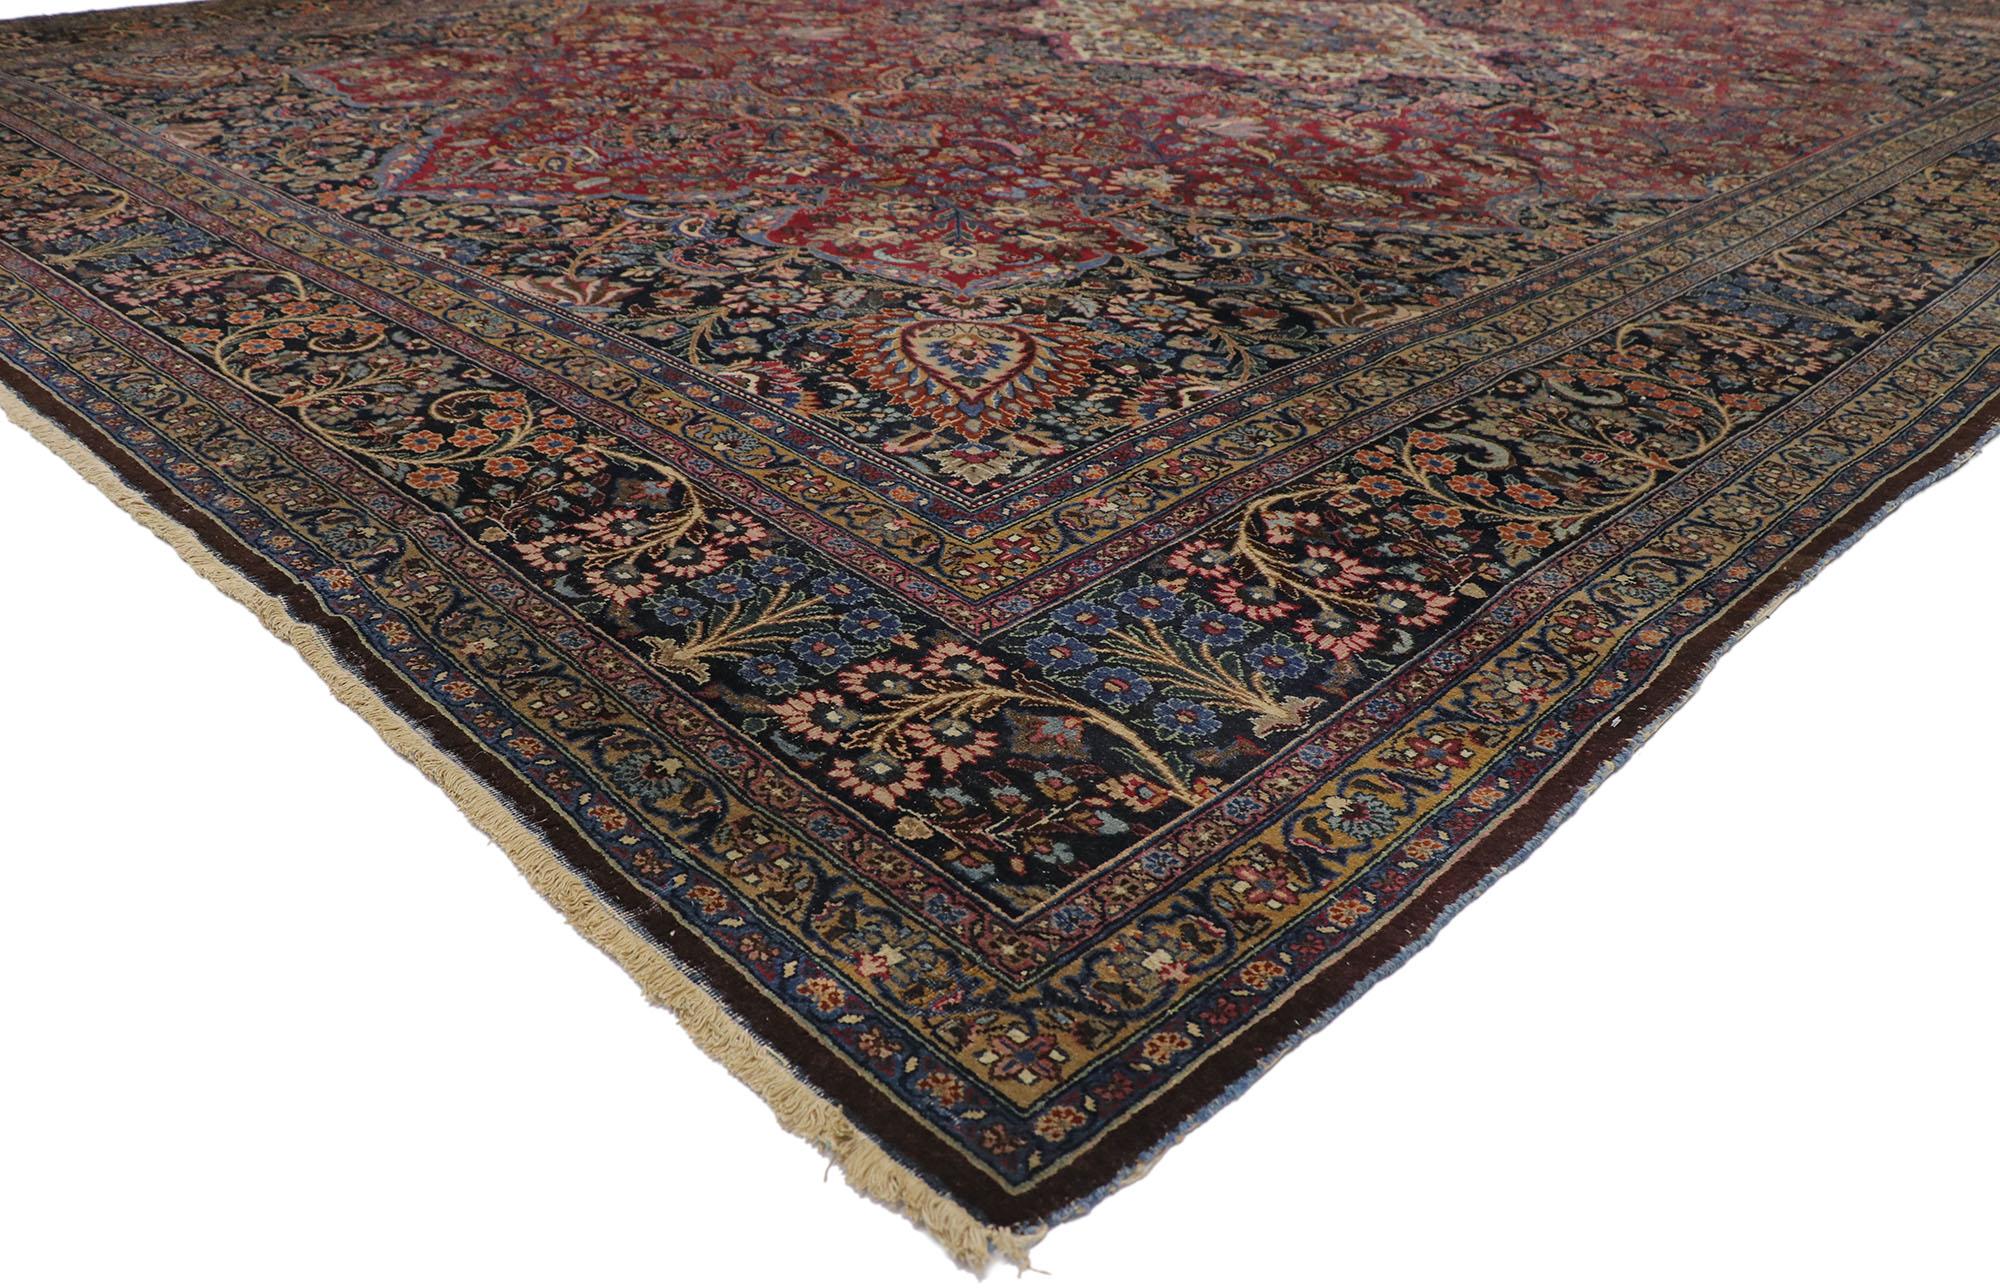 76601, antique Persian Mashhad palace rug with old world Luxe Victorian style 13'01 x 18'11. Rich in color, texture and beguiling ambiance, this hand-knotted wool antique Persian Mashhad palace rug beautifully displays timeless elegance and regal